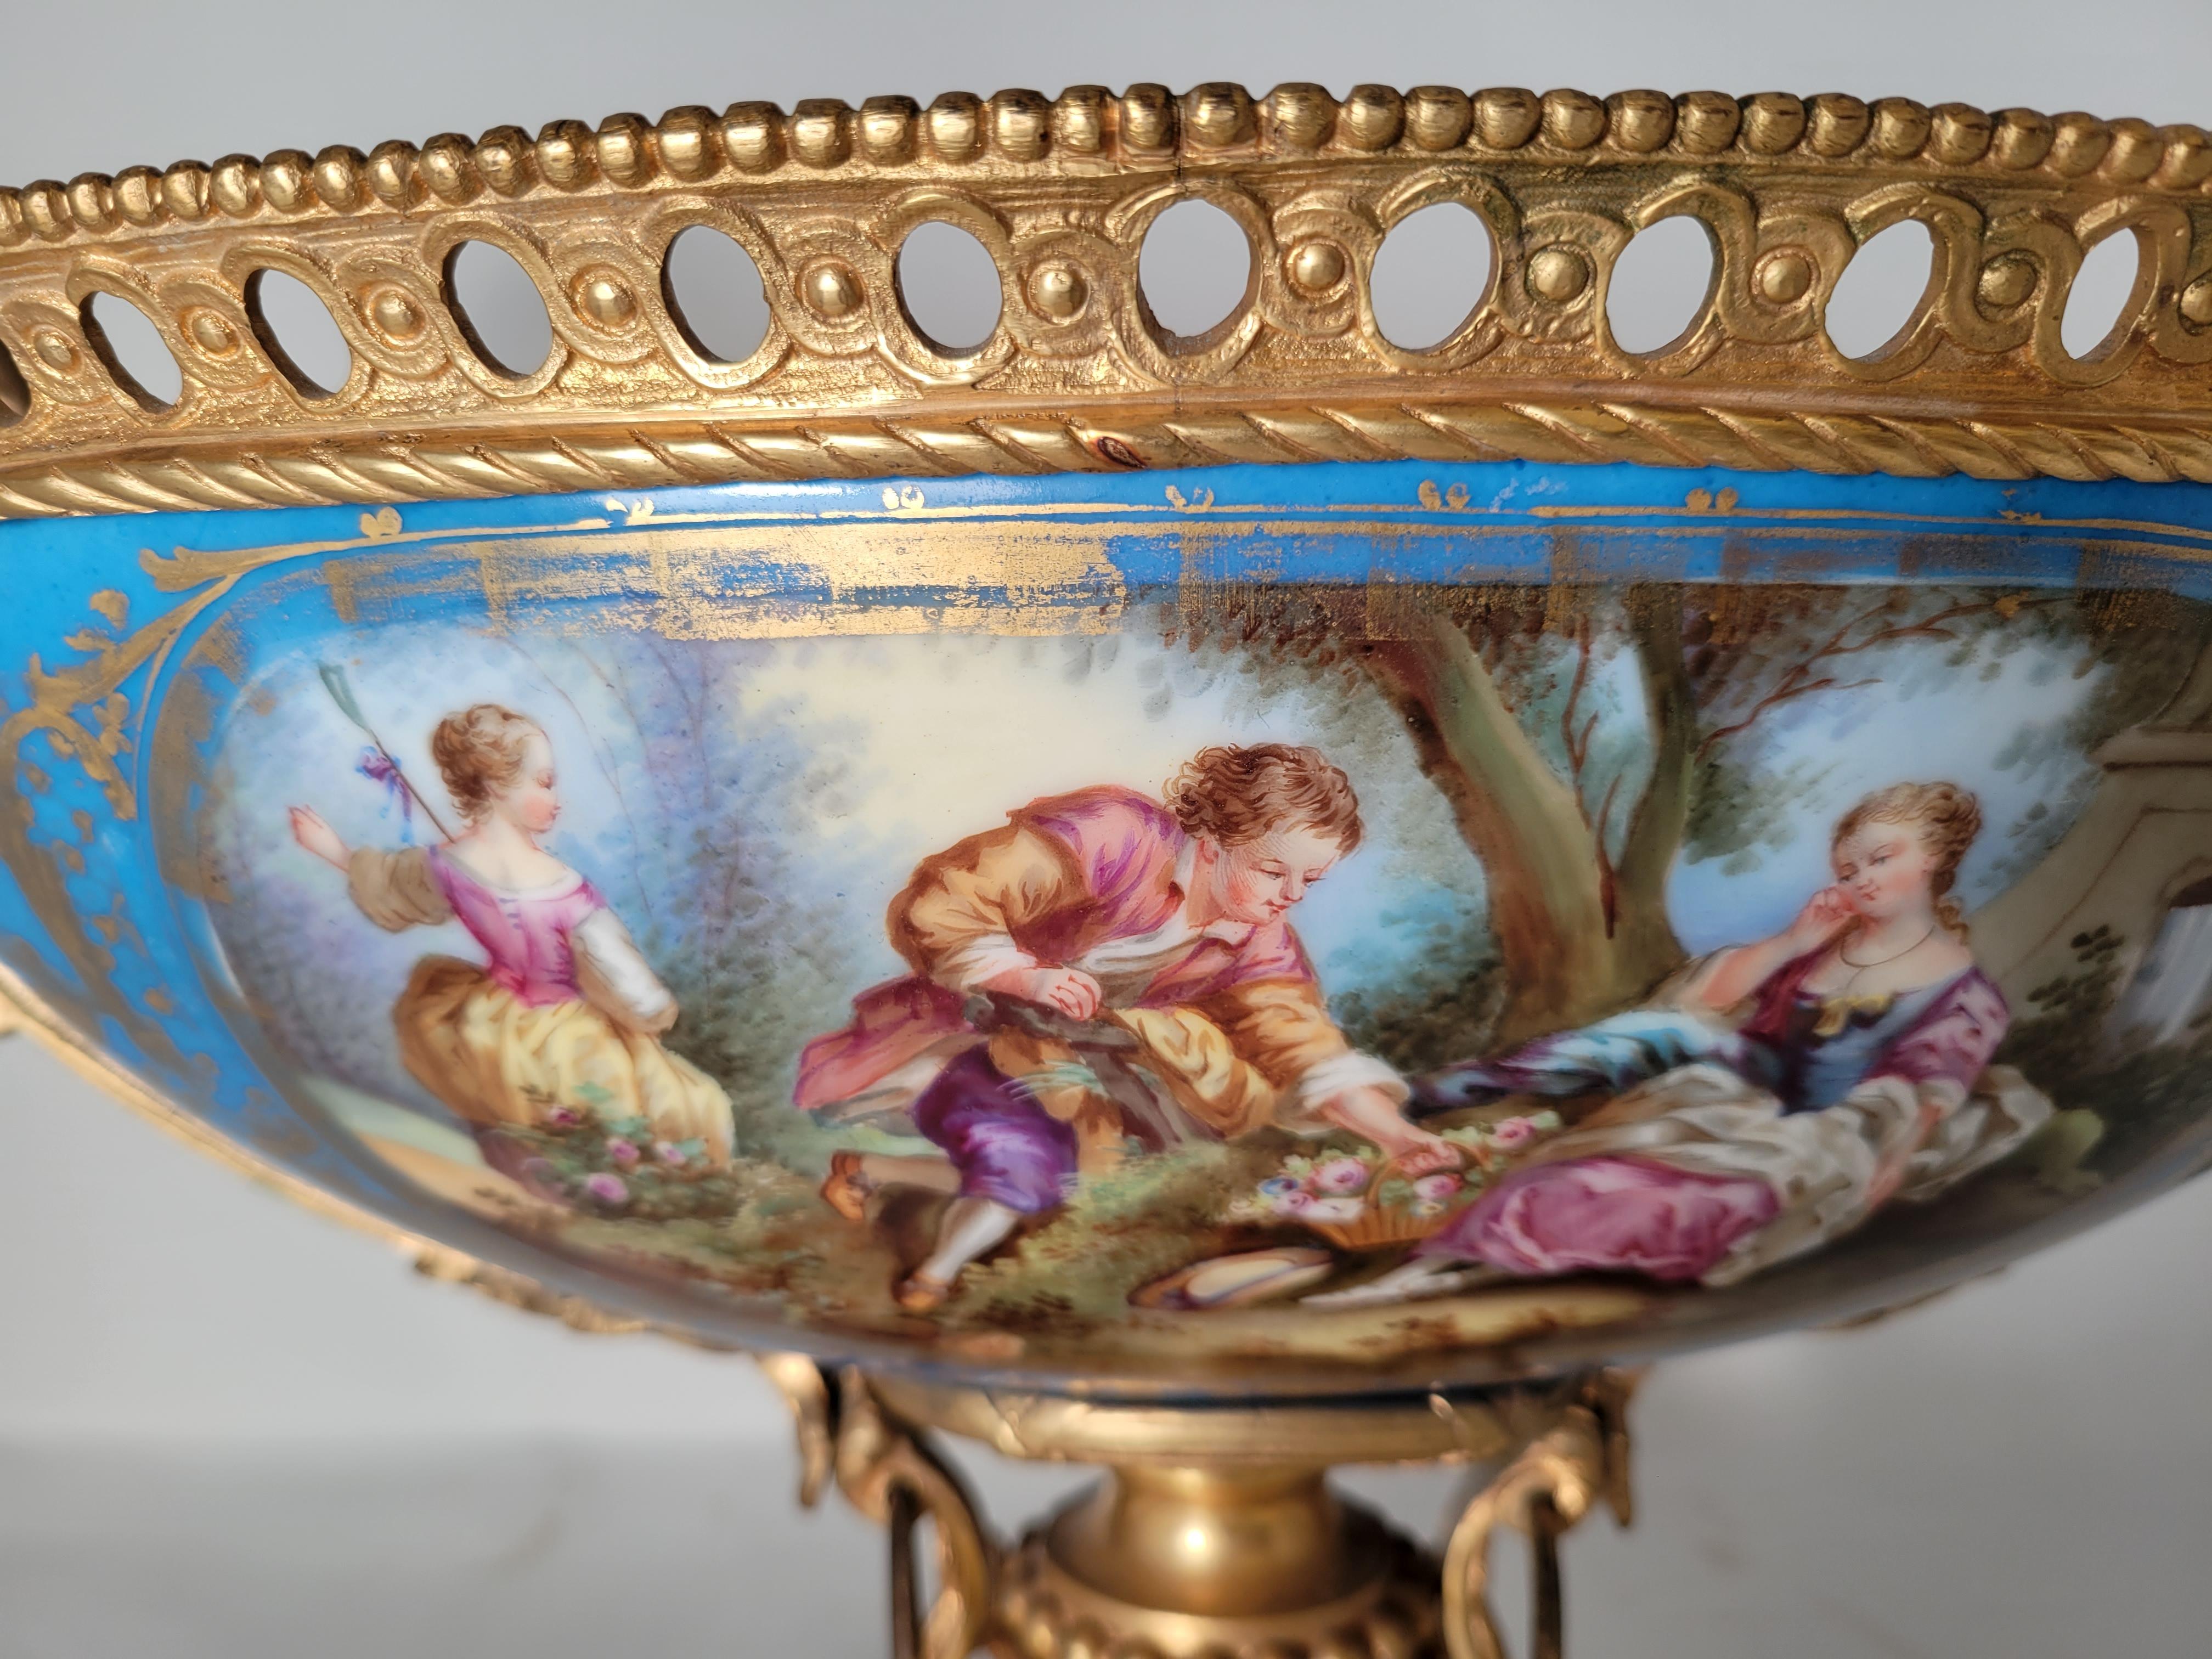 This centerpiece is very beautiful. One side has floral decorative elements and the other, a gentleman bringing a posy of flowers to a lady seated on the ground, while another watches on. The colors are still very vibrant give the age of the piece.